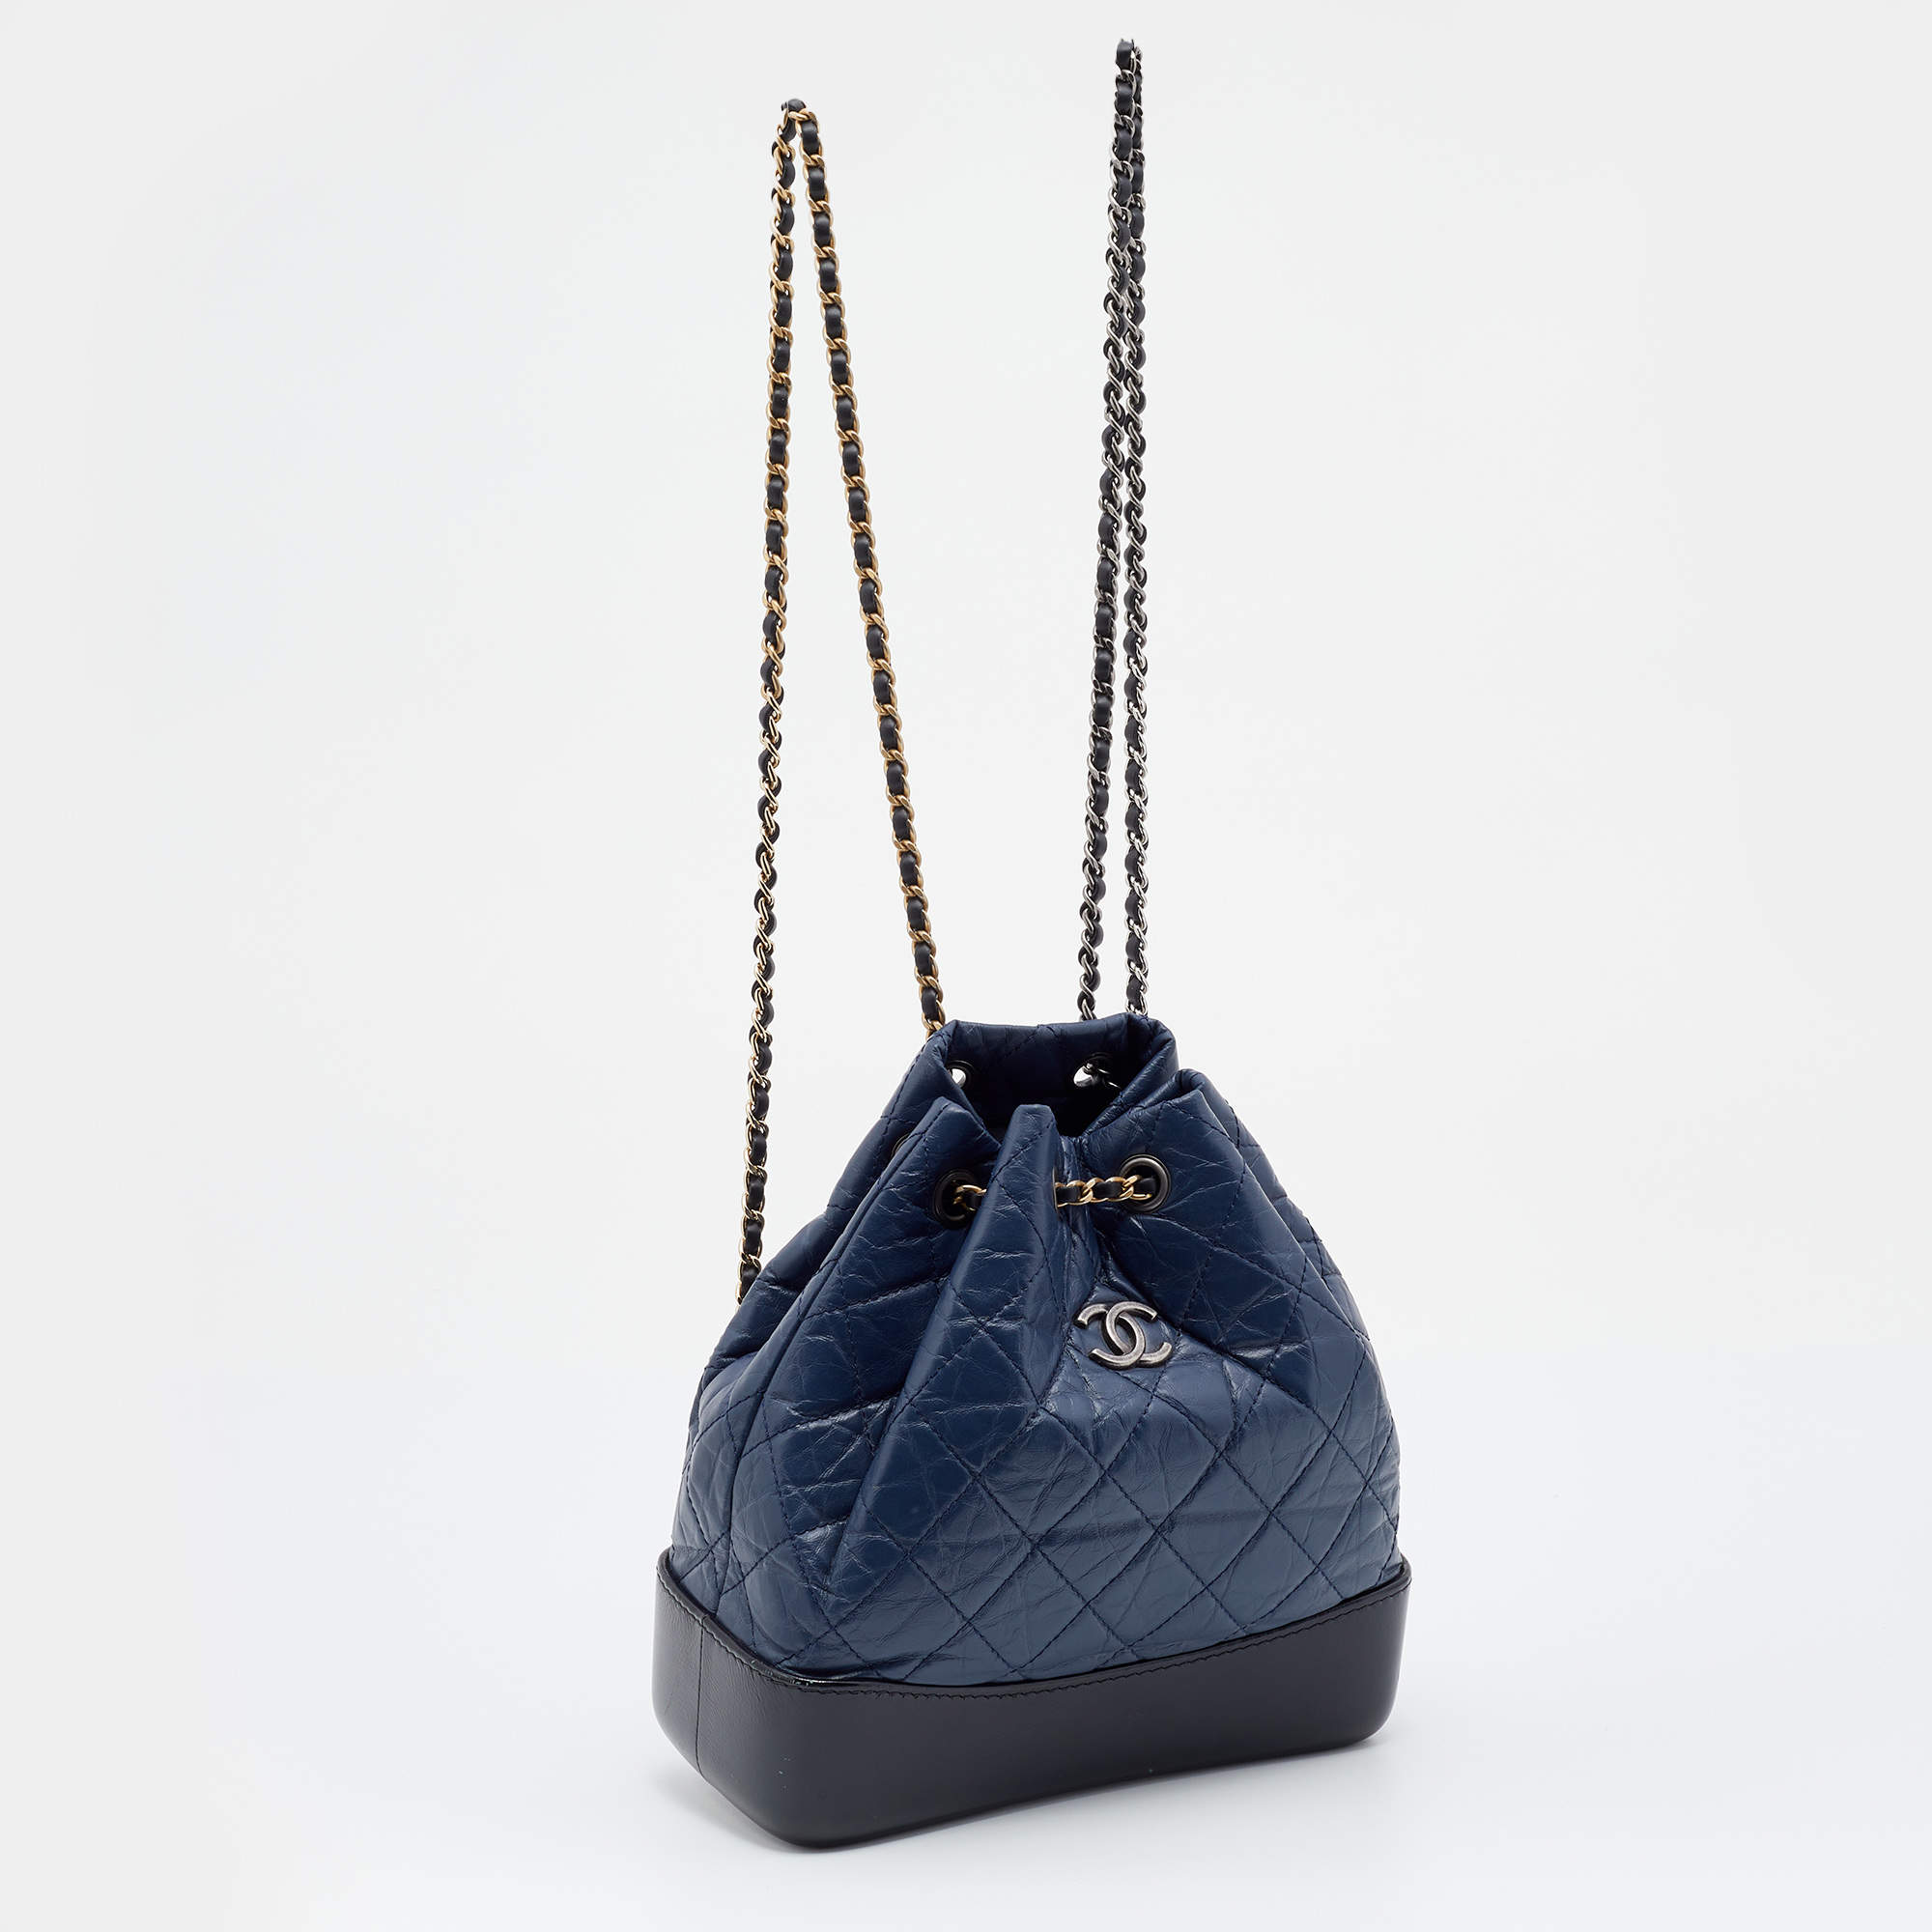 Chanel Blue/Black Quilted Aged Leather Small Gabrielle Backpack Chanel